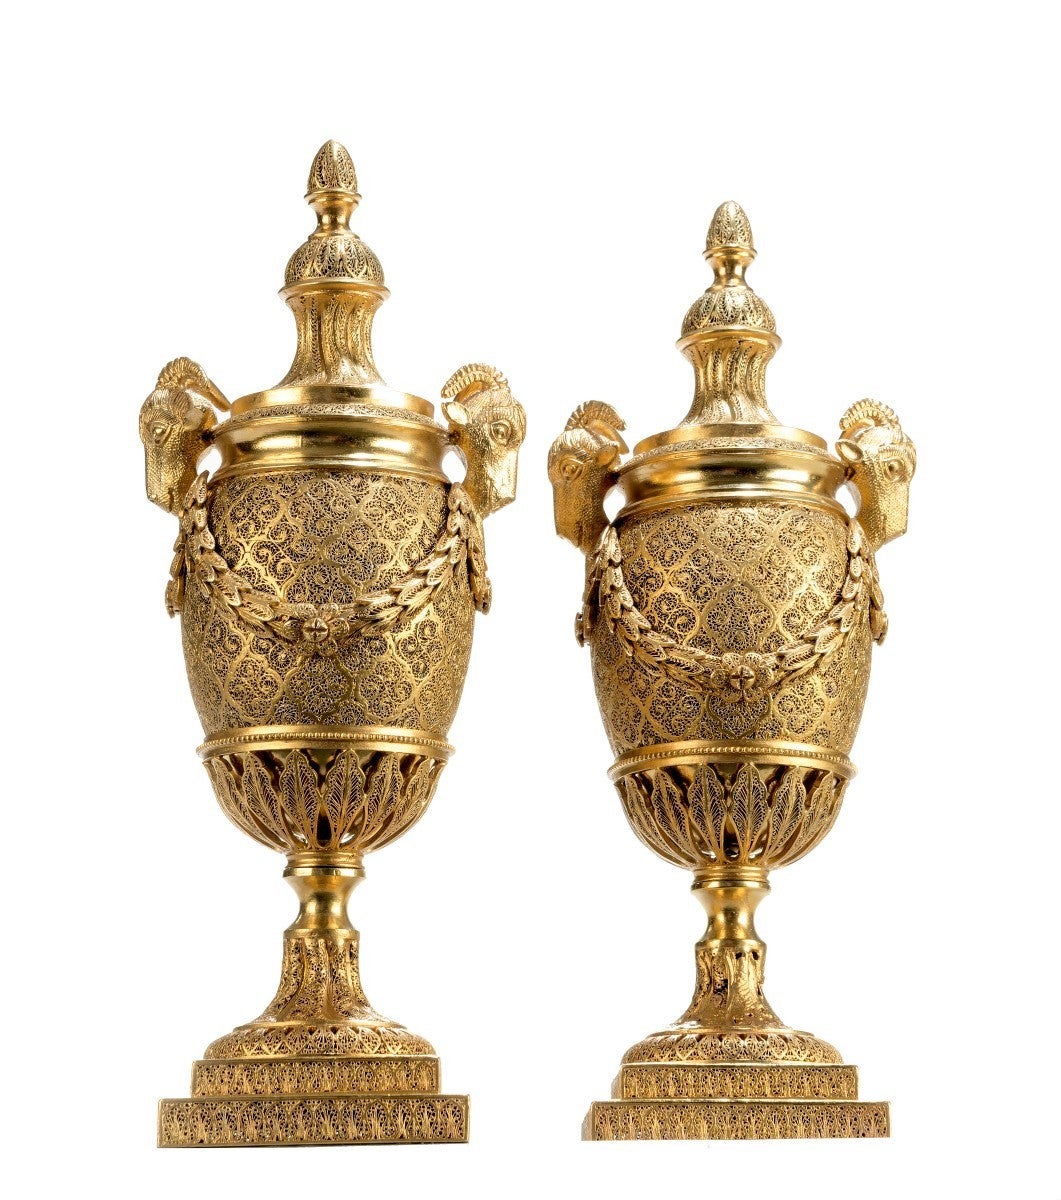 Pair of silver gilt filigree Goat's-Head candle vases after a design by Matthew Boulton; the tops are reversible to become candle-holders above an amphora-shaped body with swags flanking on either side from a pair of rams head masks on a short socle